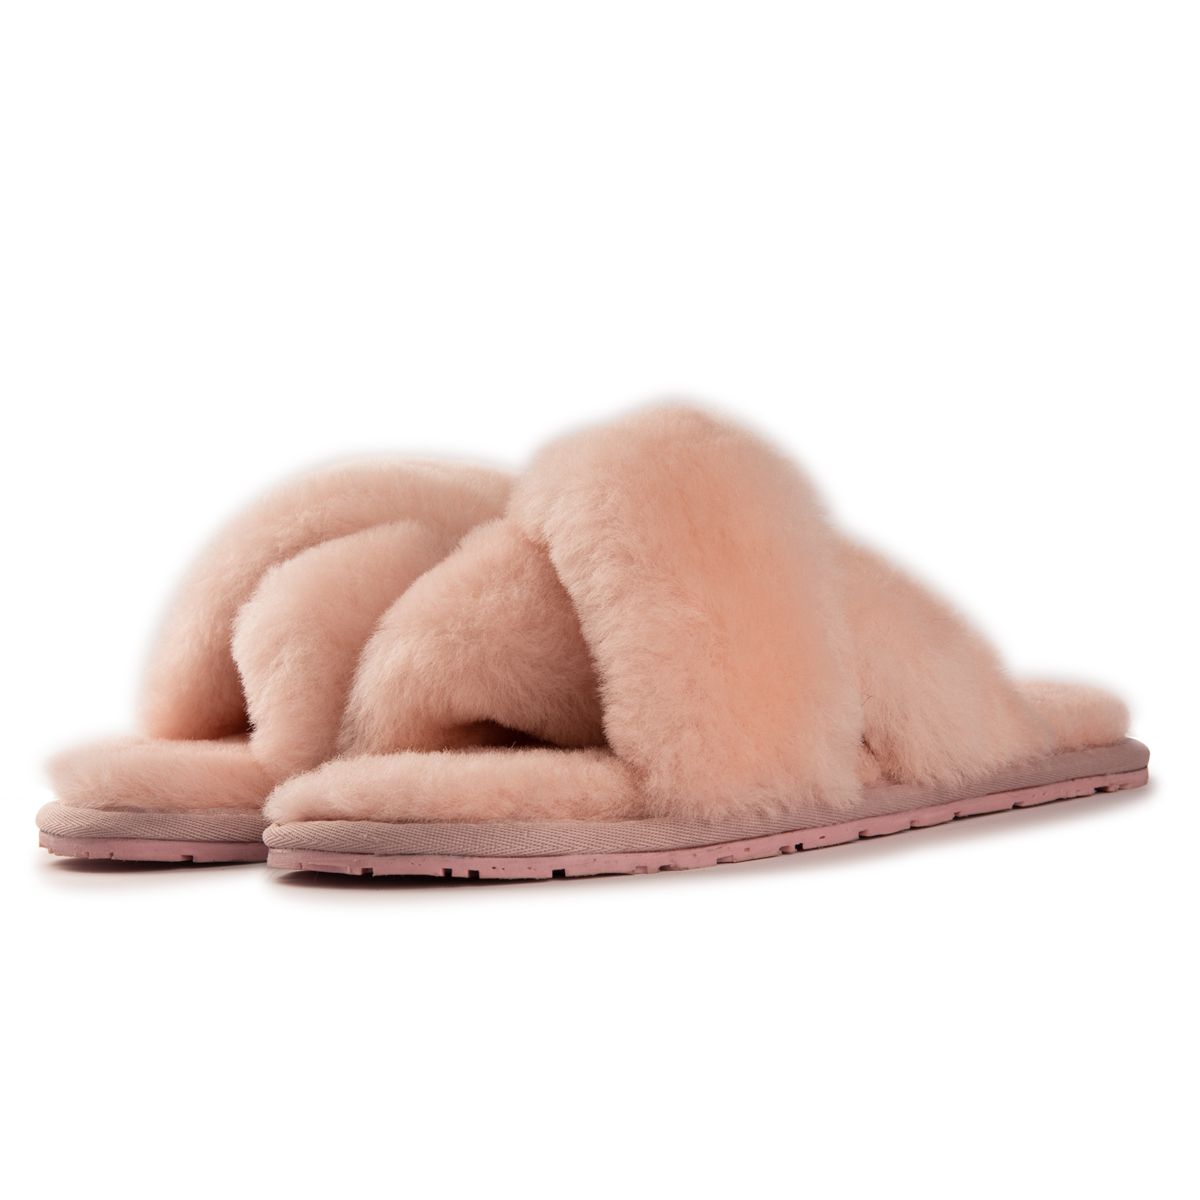 Soft premium genuine Australian Sheepskin wool upper 
 Easy to slide on footwear used in any weather 
 Full premium sheepskin insole 
 Cross over style strap giving a great fit 
 Soft Rubber outsole – highly durable and lightweight 
 Stylish, Fluffy and cosy all at the same time 
 100% brand new and high quality, comes in a branded box, suitable for gifting